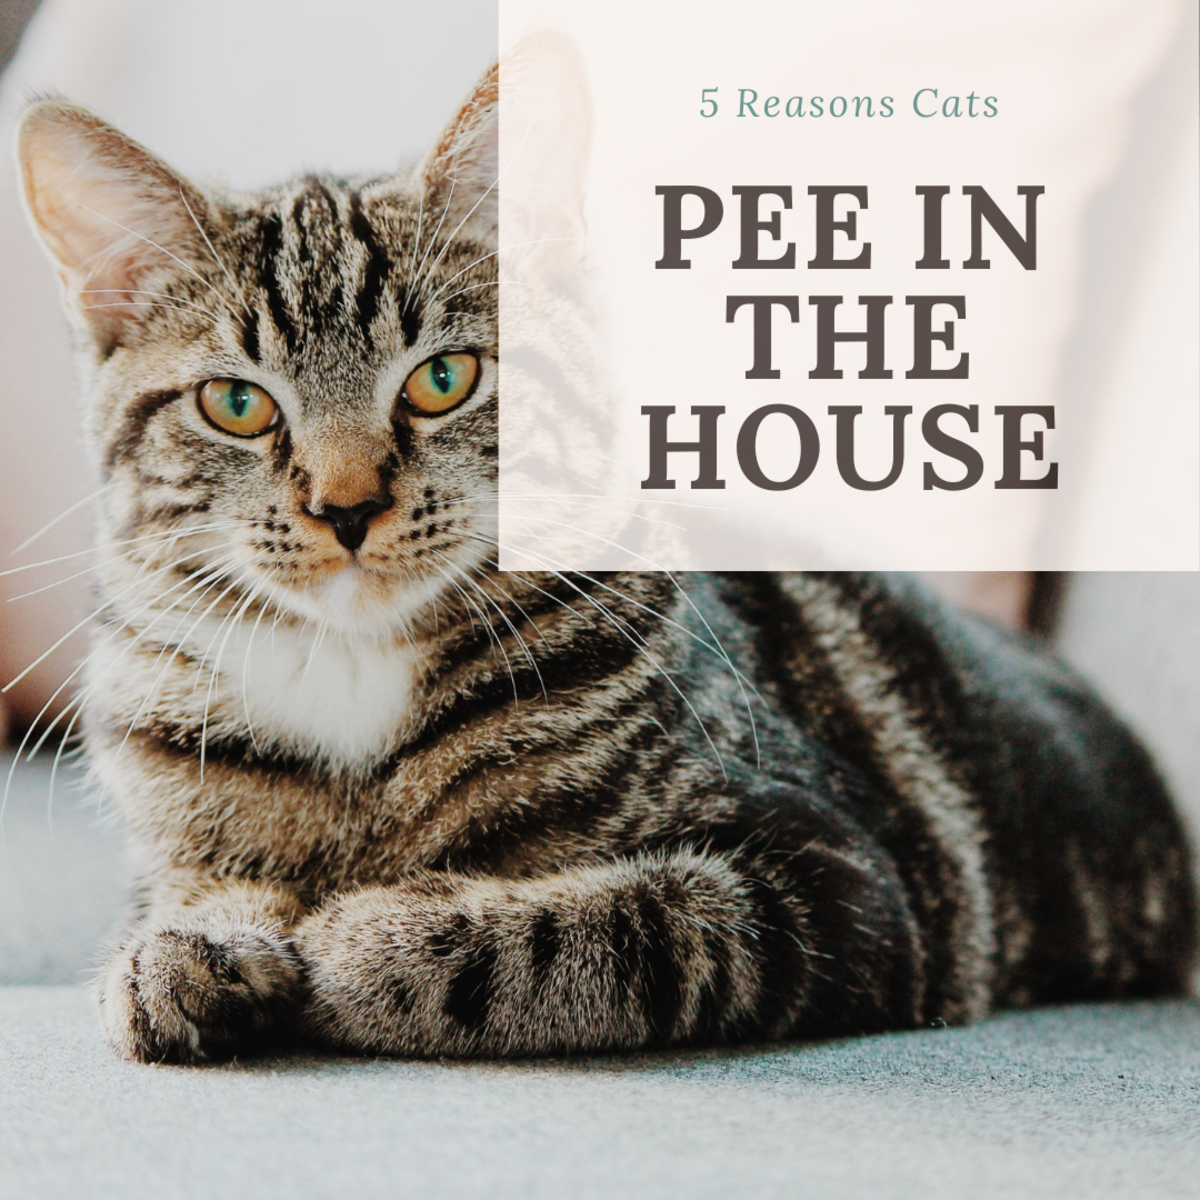 Why Do Cats Pee in the House? Top Five Reasons